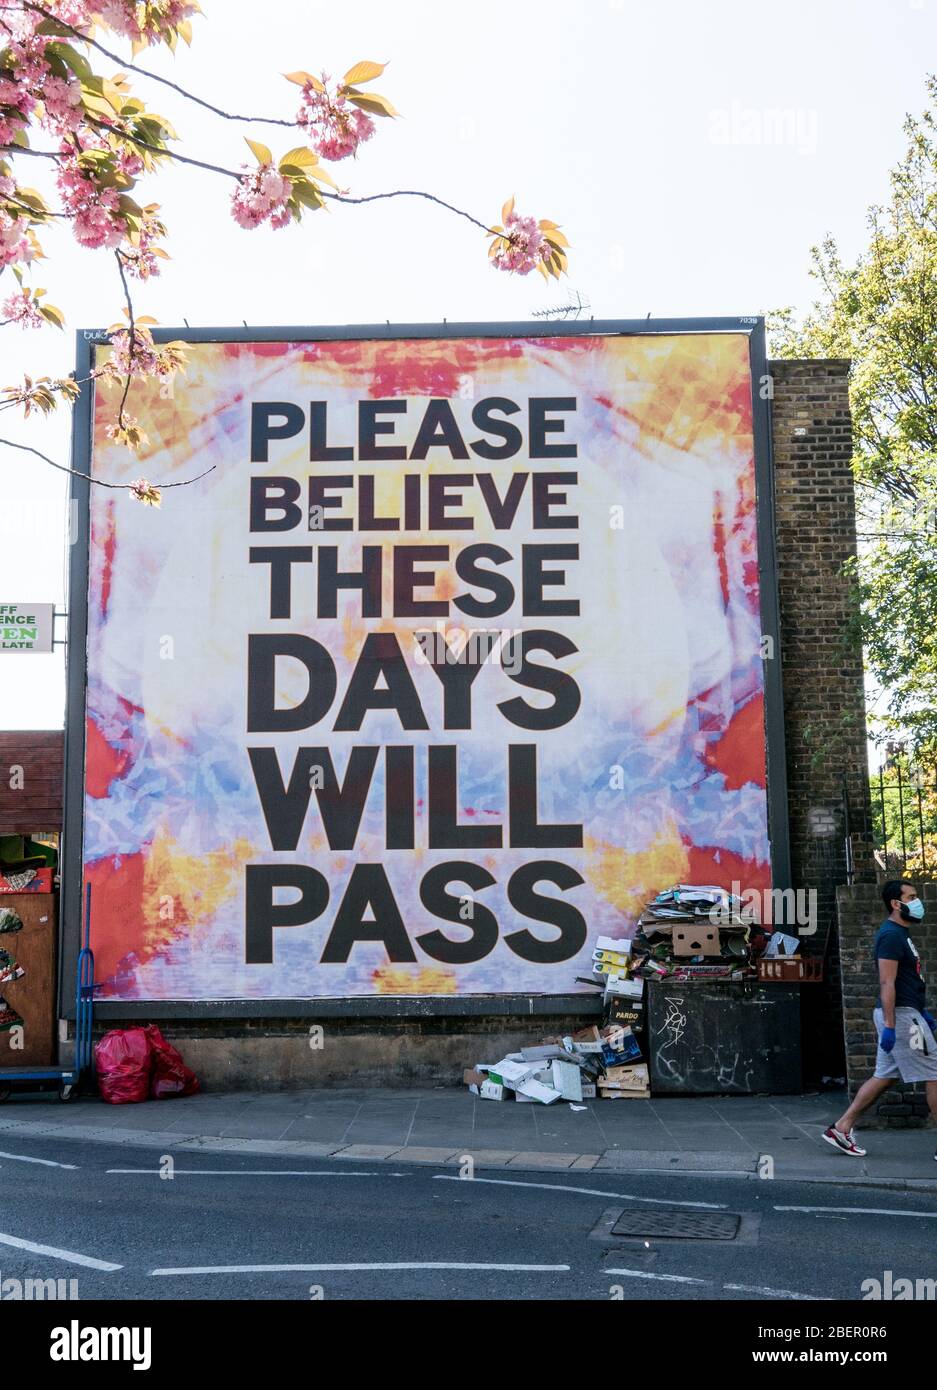 documenting Corona Virus days in London during lock down restriction .London fields area, London,14/04/2020. Billboard with positive thought. Stock Photo